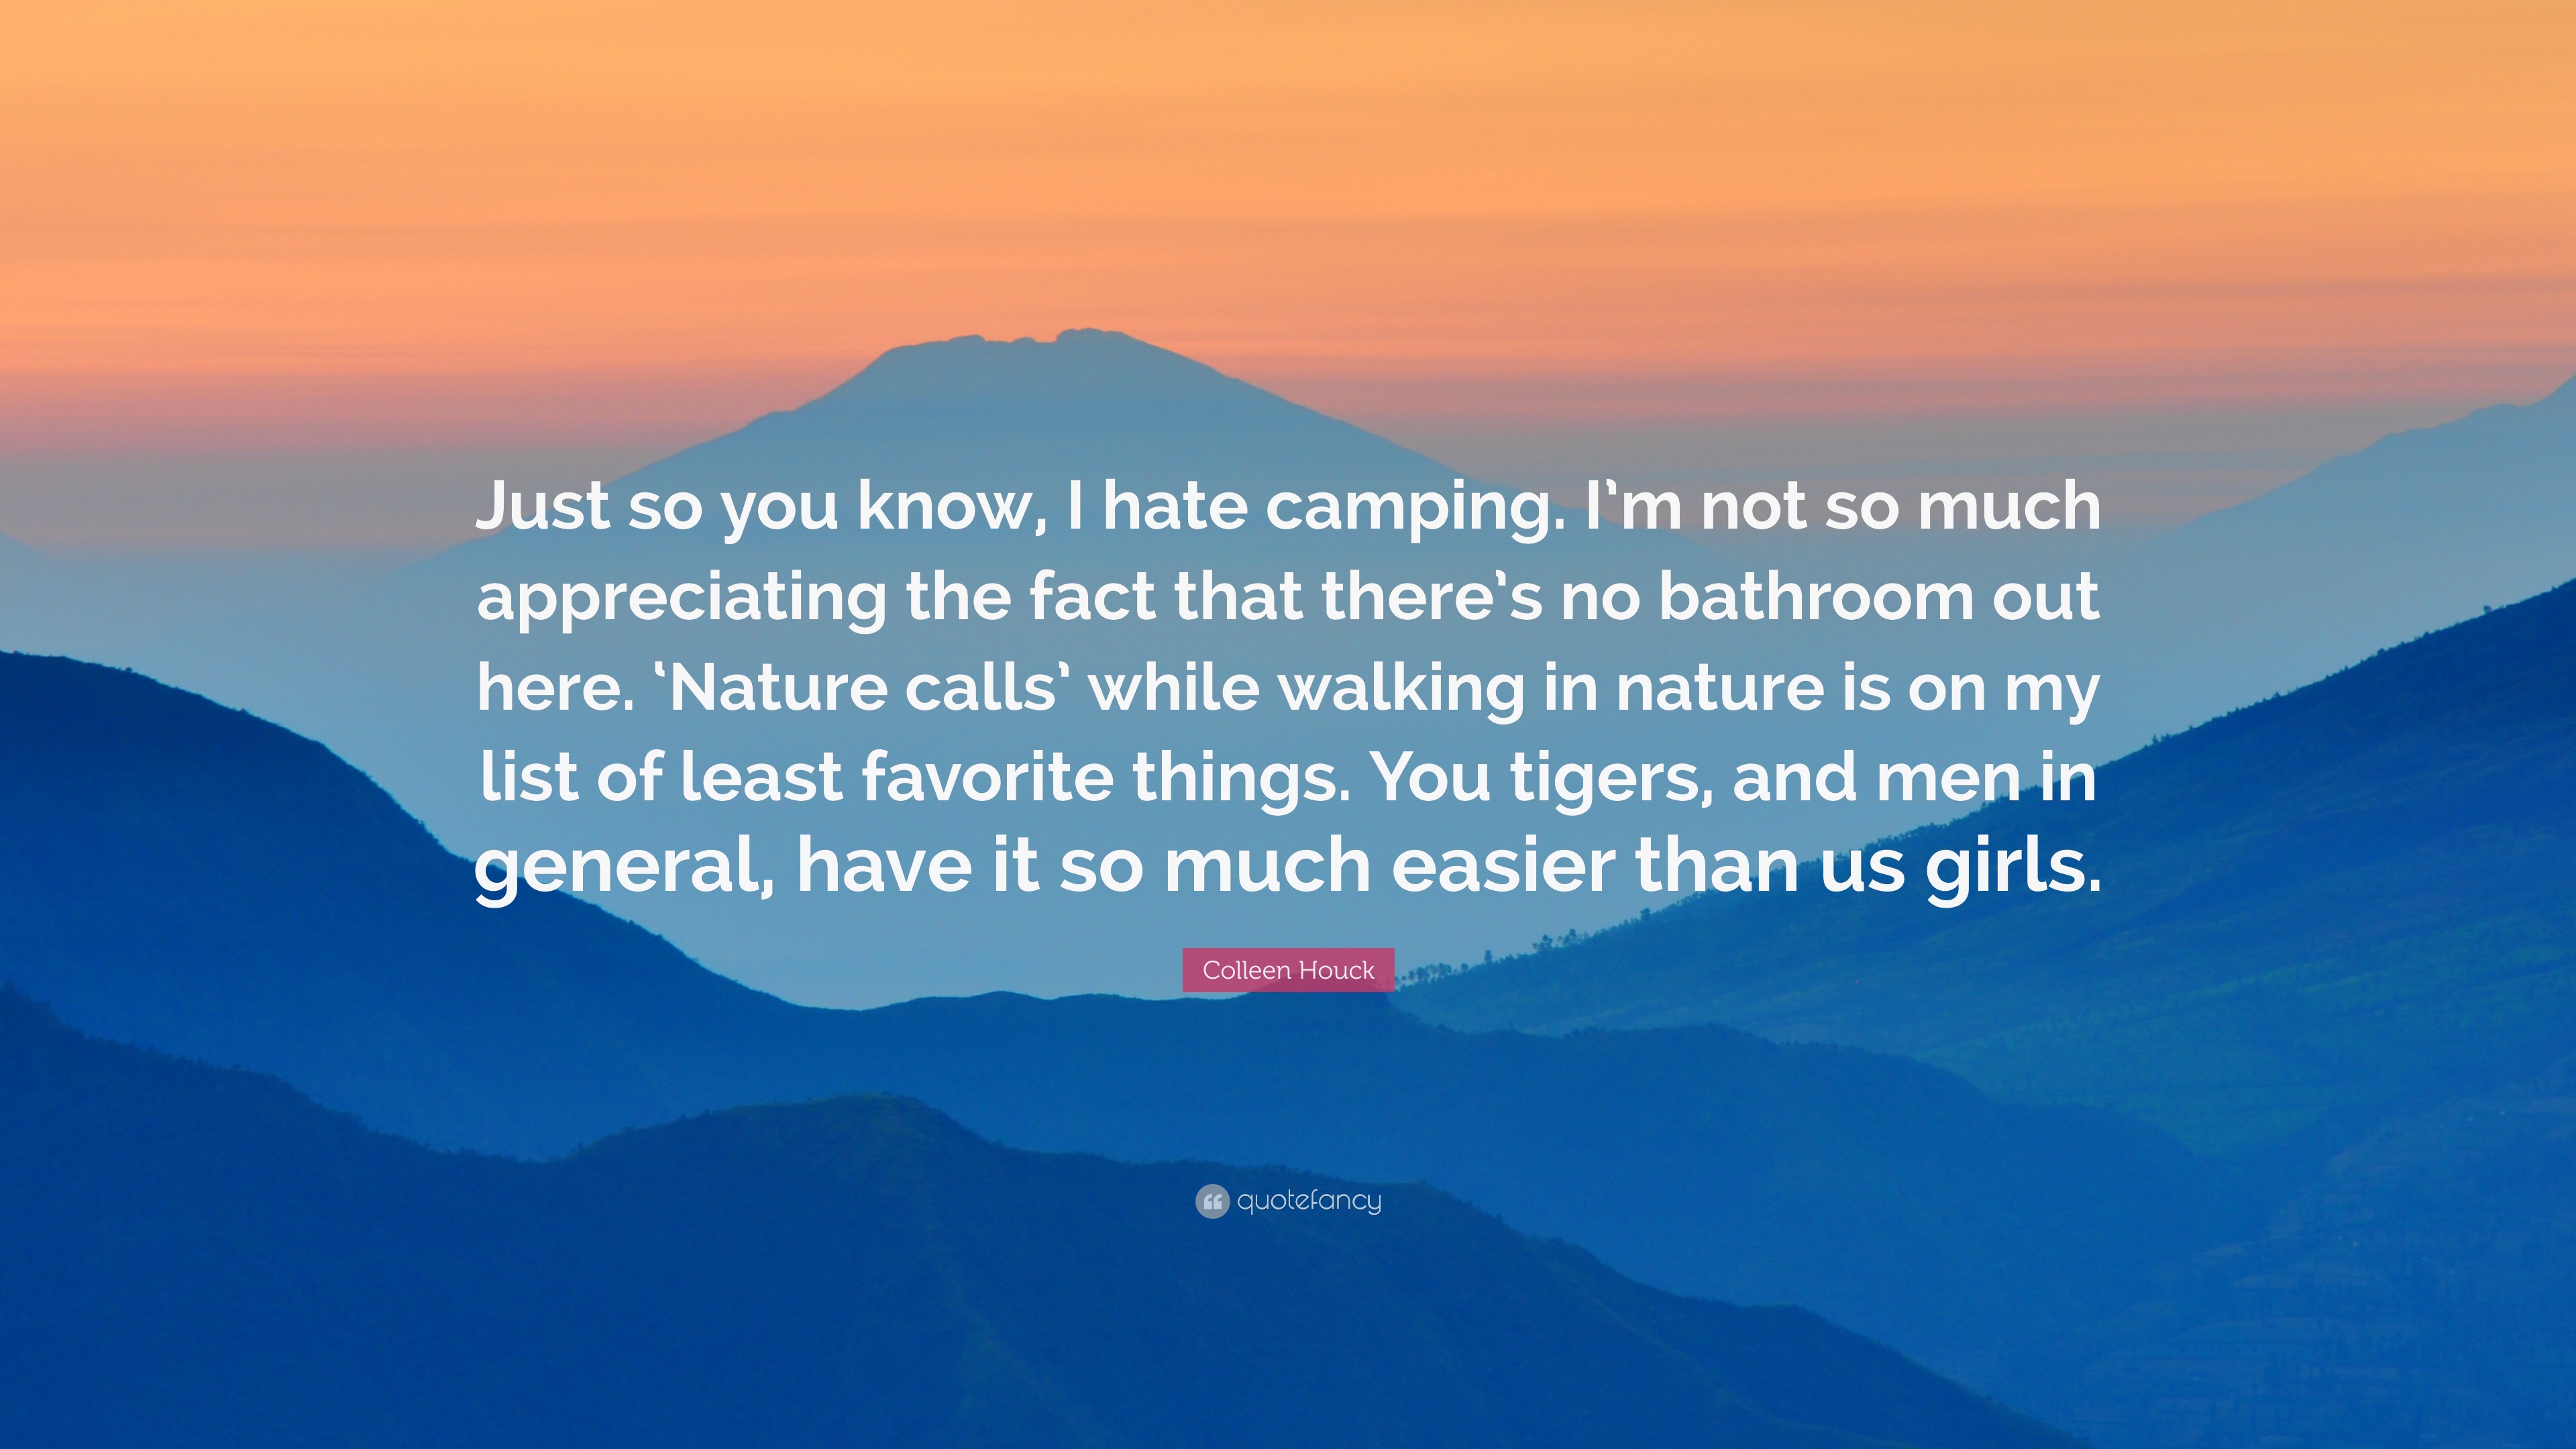 Colleen Houck Quote: “Just so you know, I hate camping. I'm not so